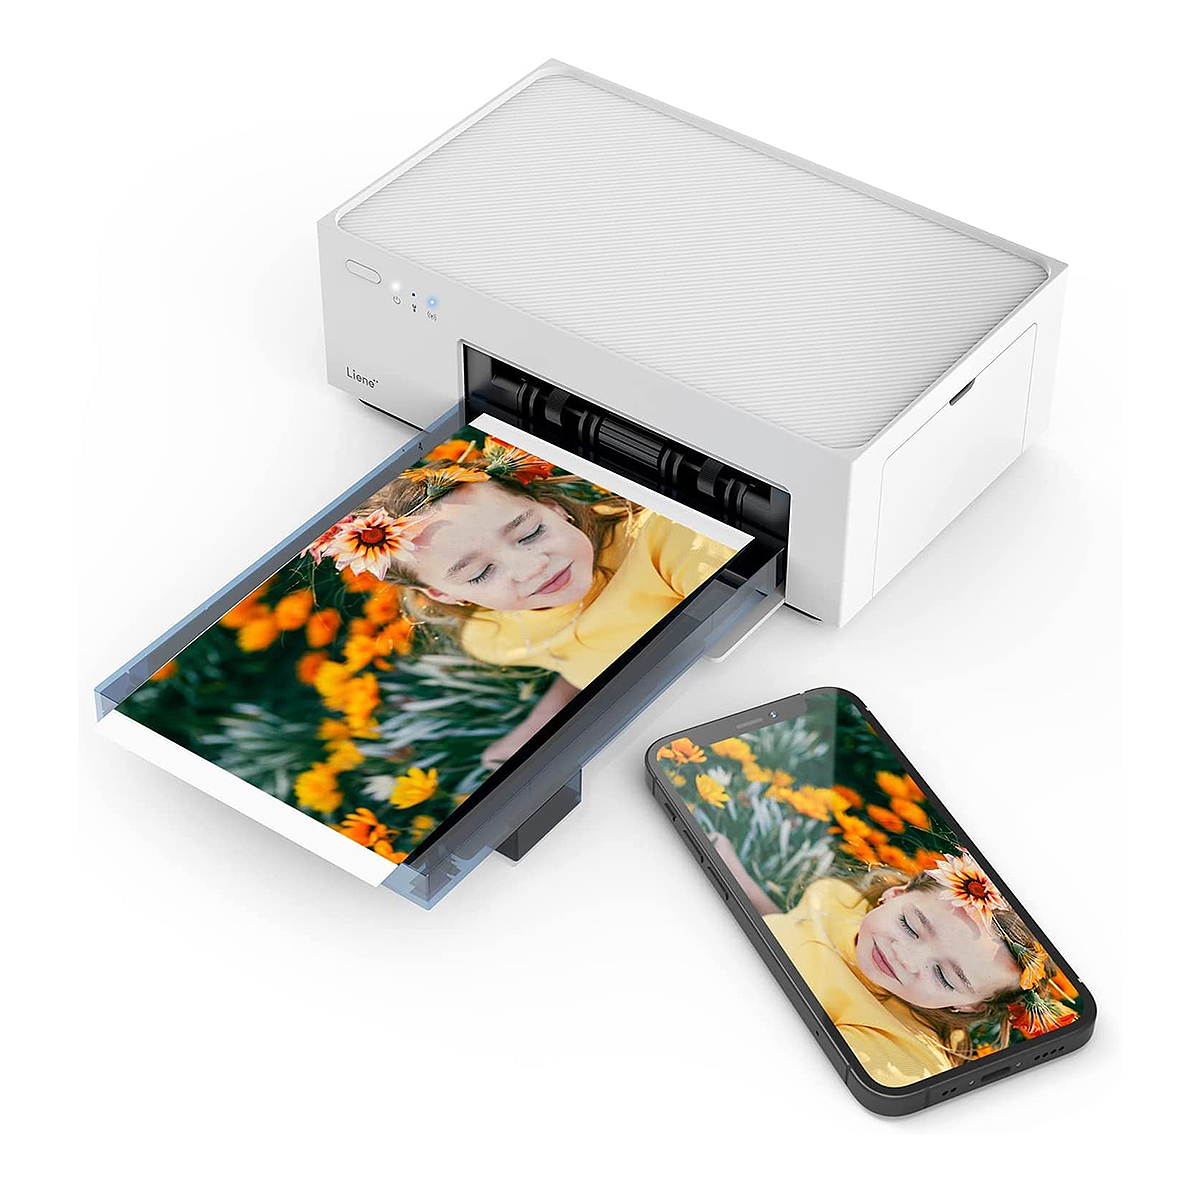 https://www.usmagazine.com/wp-content/uploads/2022/04/mothers-day-gifts-liene-photo-printer.jpg?quality=82&strip=all